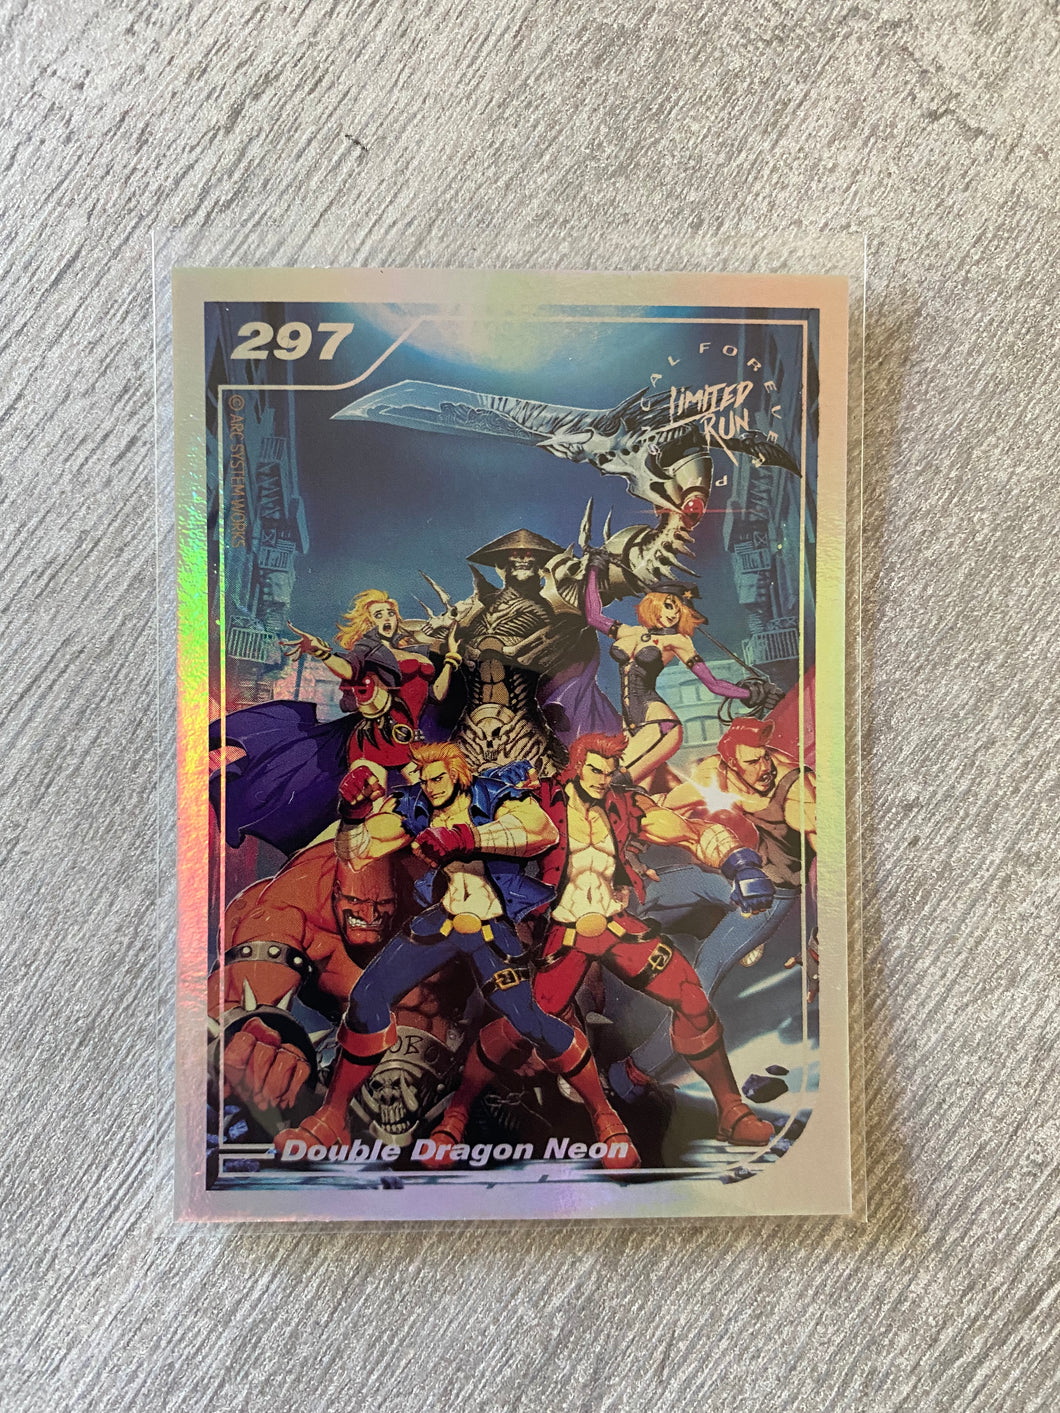 Gen2 #297 Silver Double dragon neon Limited run games Trading card